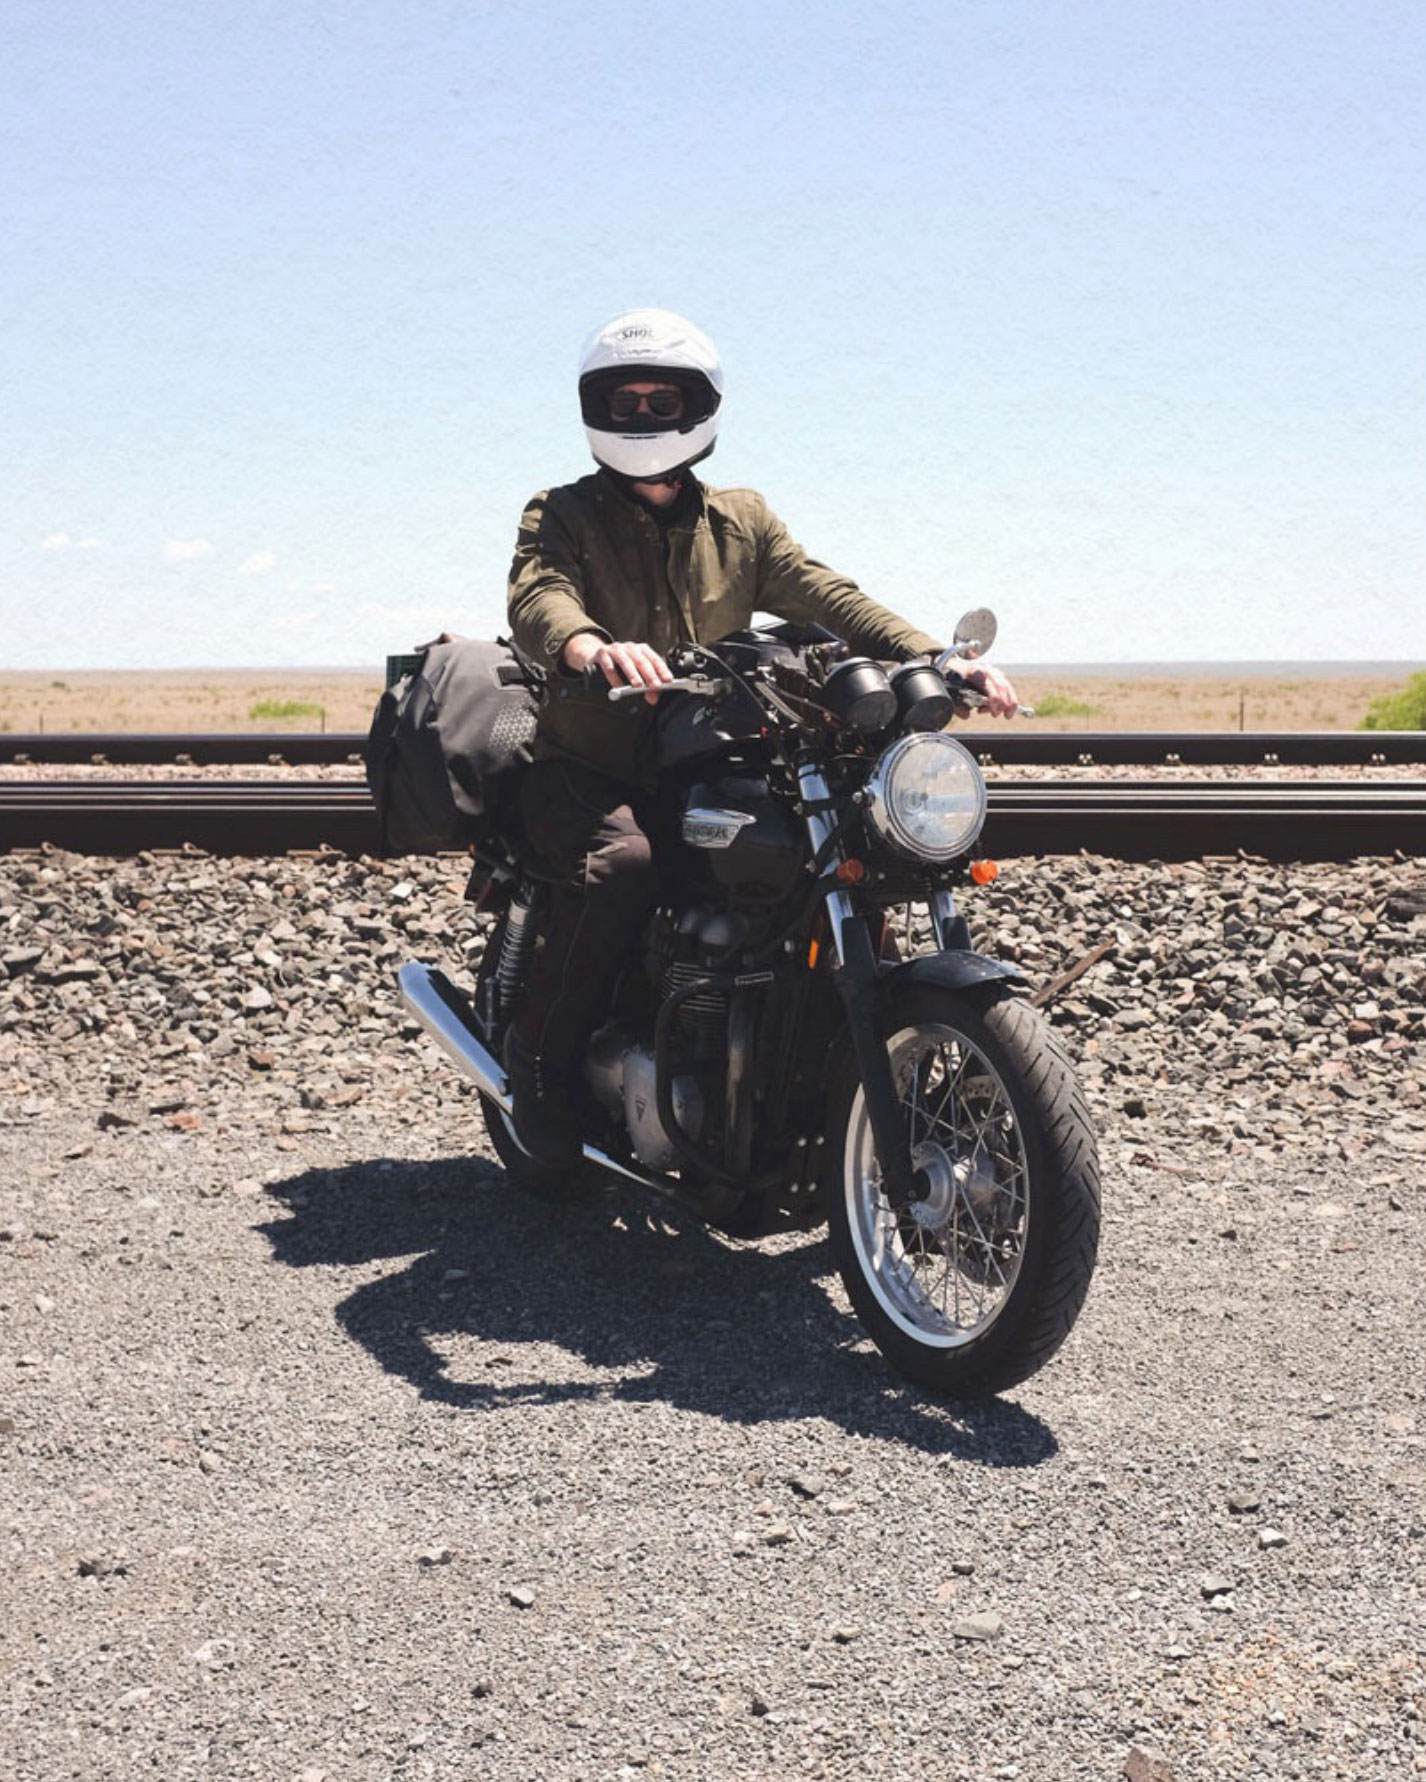 Me on a motorcycle somewhere in west Texas